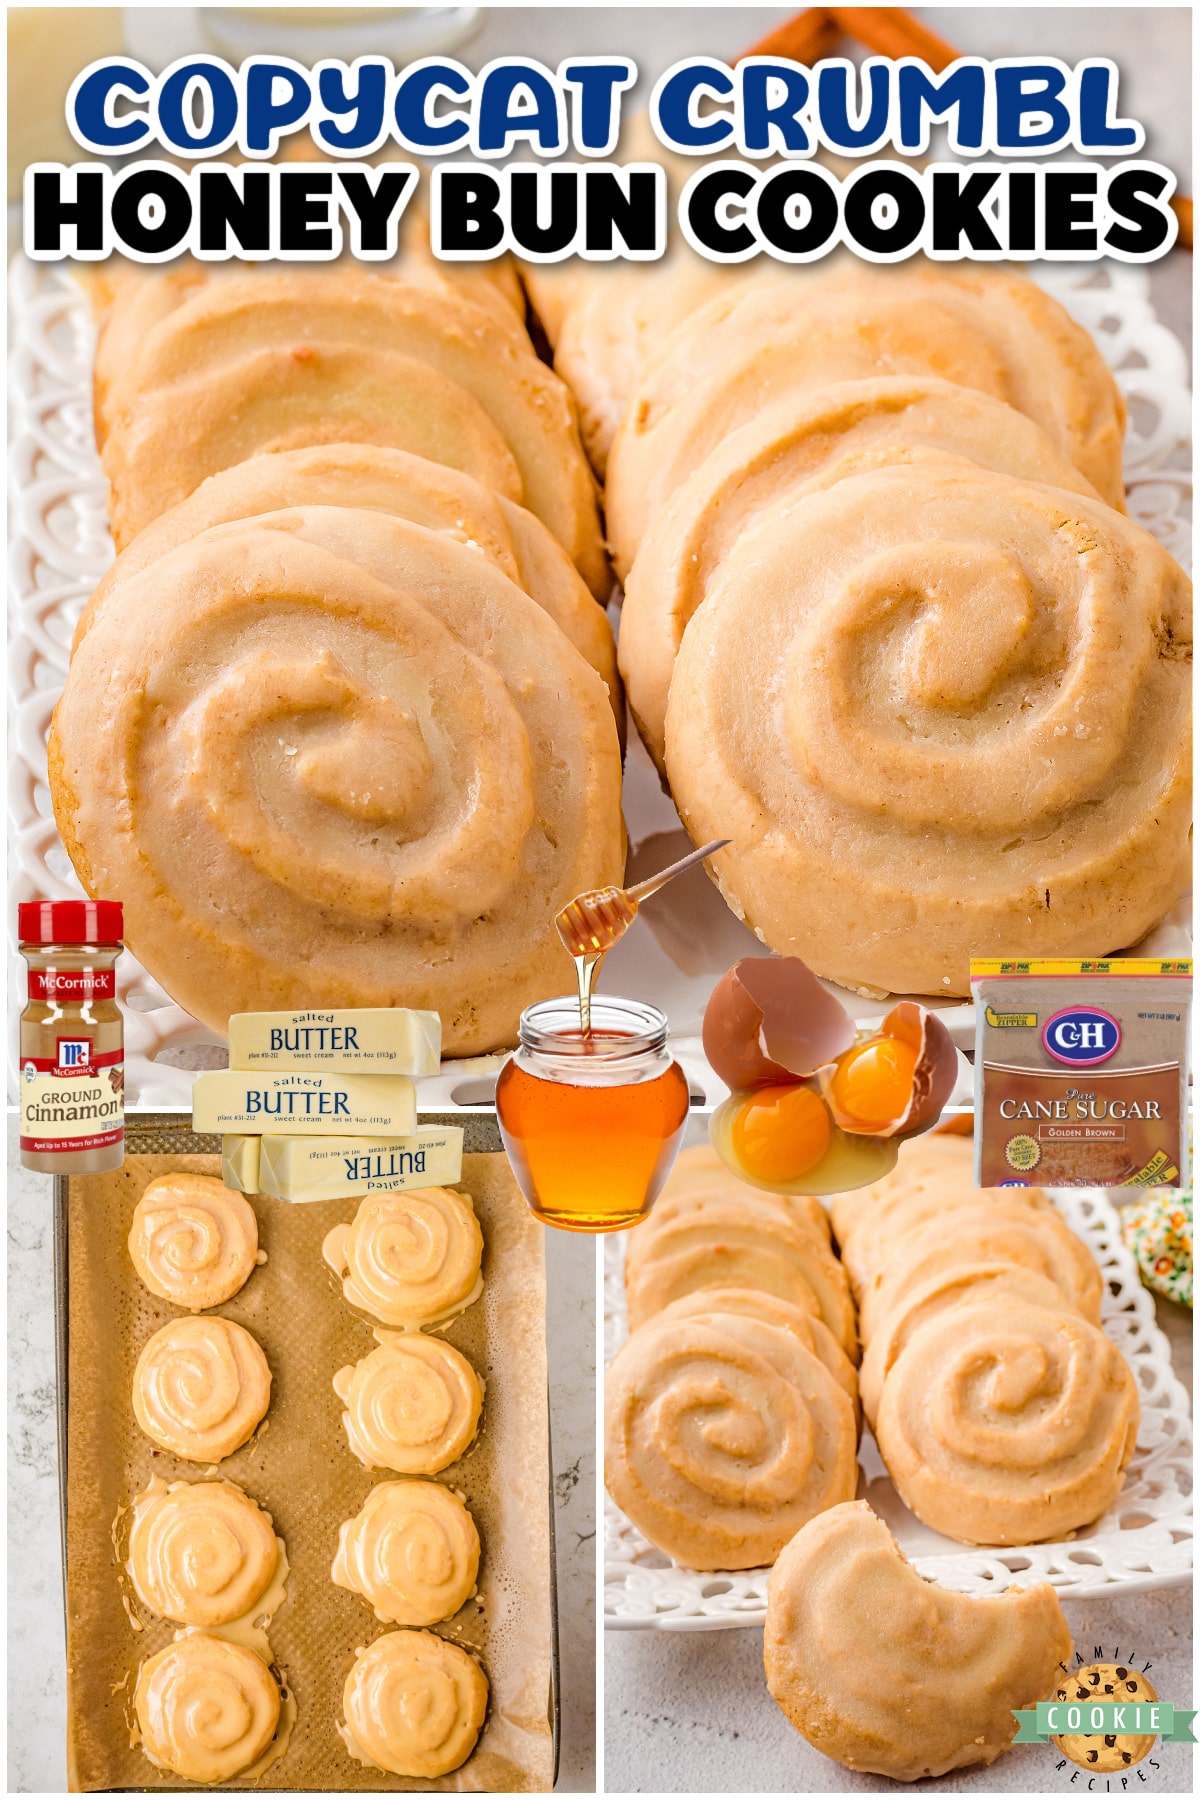 Honey Bun Cookies look just like a honey bun and are topped with a delicious honey butter glaze. Honey bun Crumbl cookie recipe has an incredible warm buttery cinnamon flavor everyone loves!